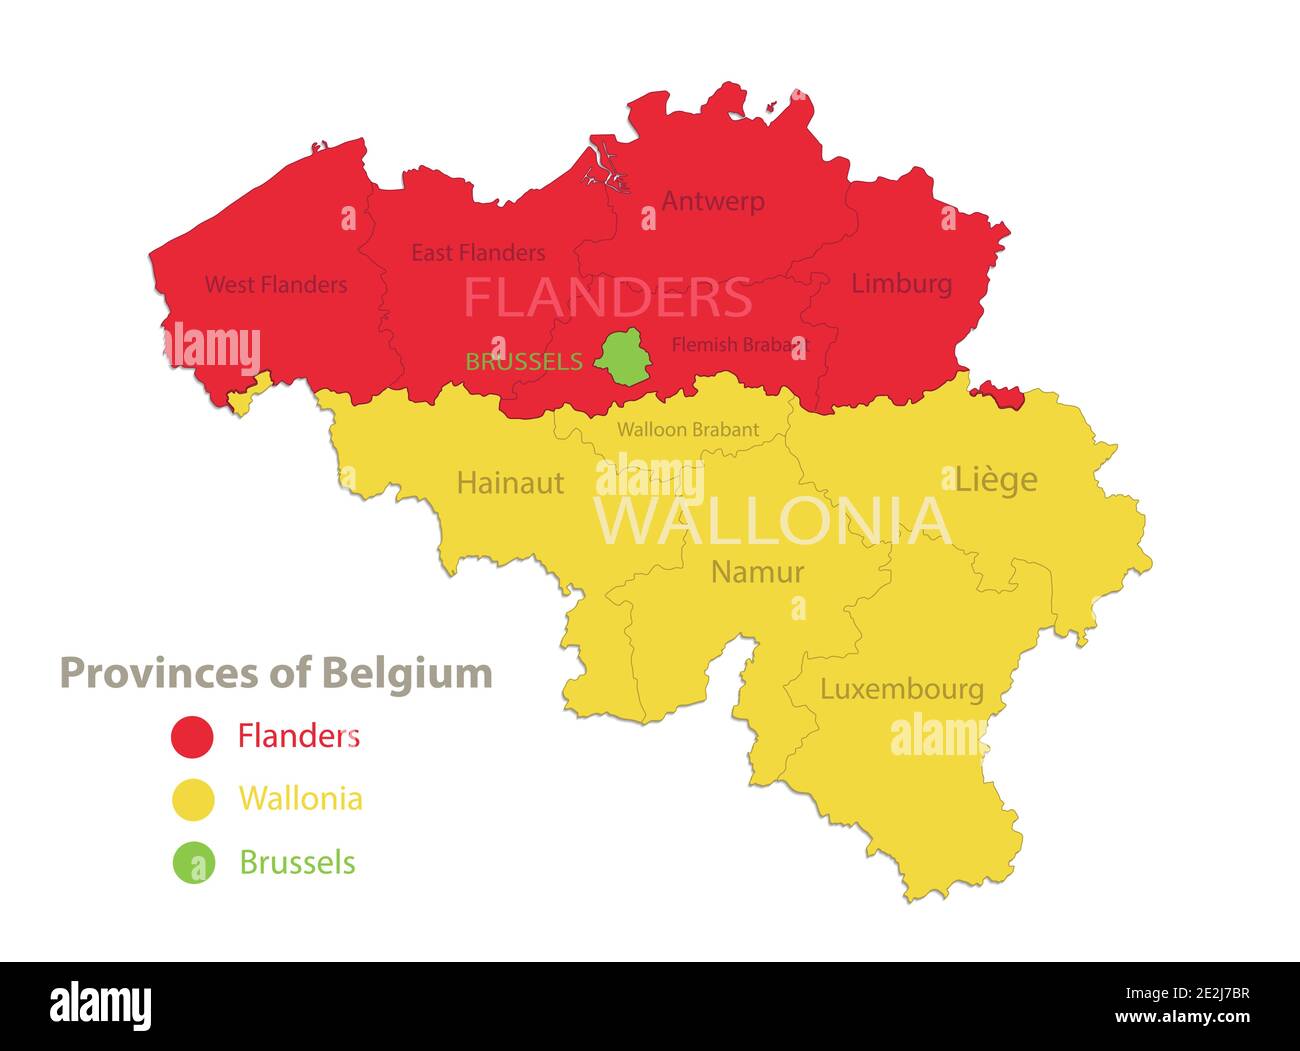 belgium-map-individual-regions-with-names-provinces-of-belgium-isolated-on-white-background-vector-2E2J7BR.jpeg